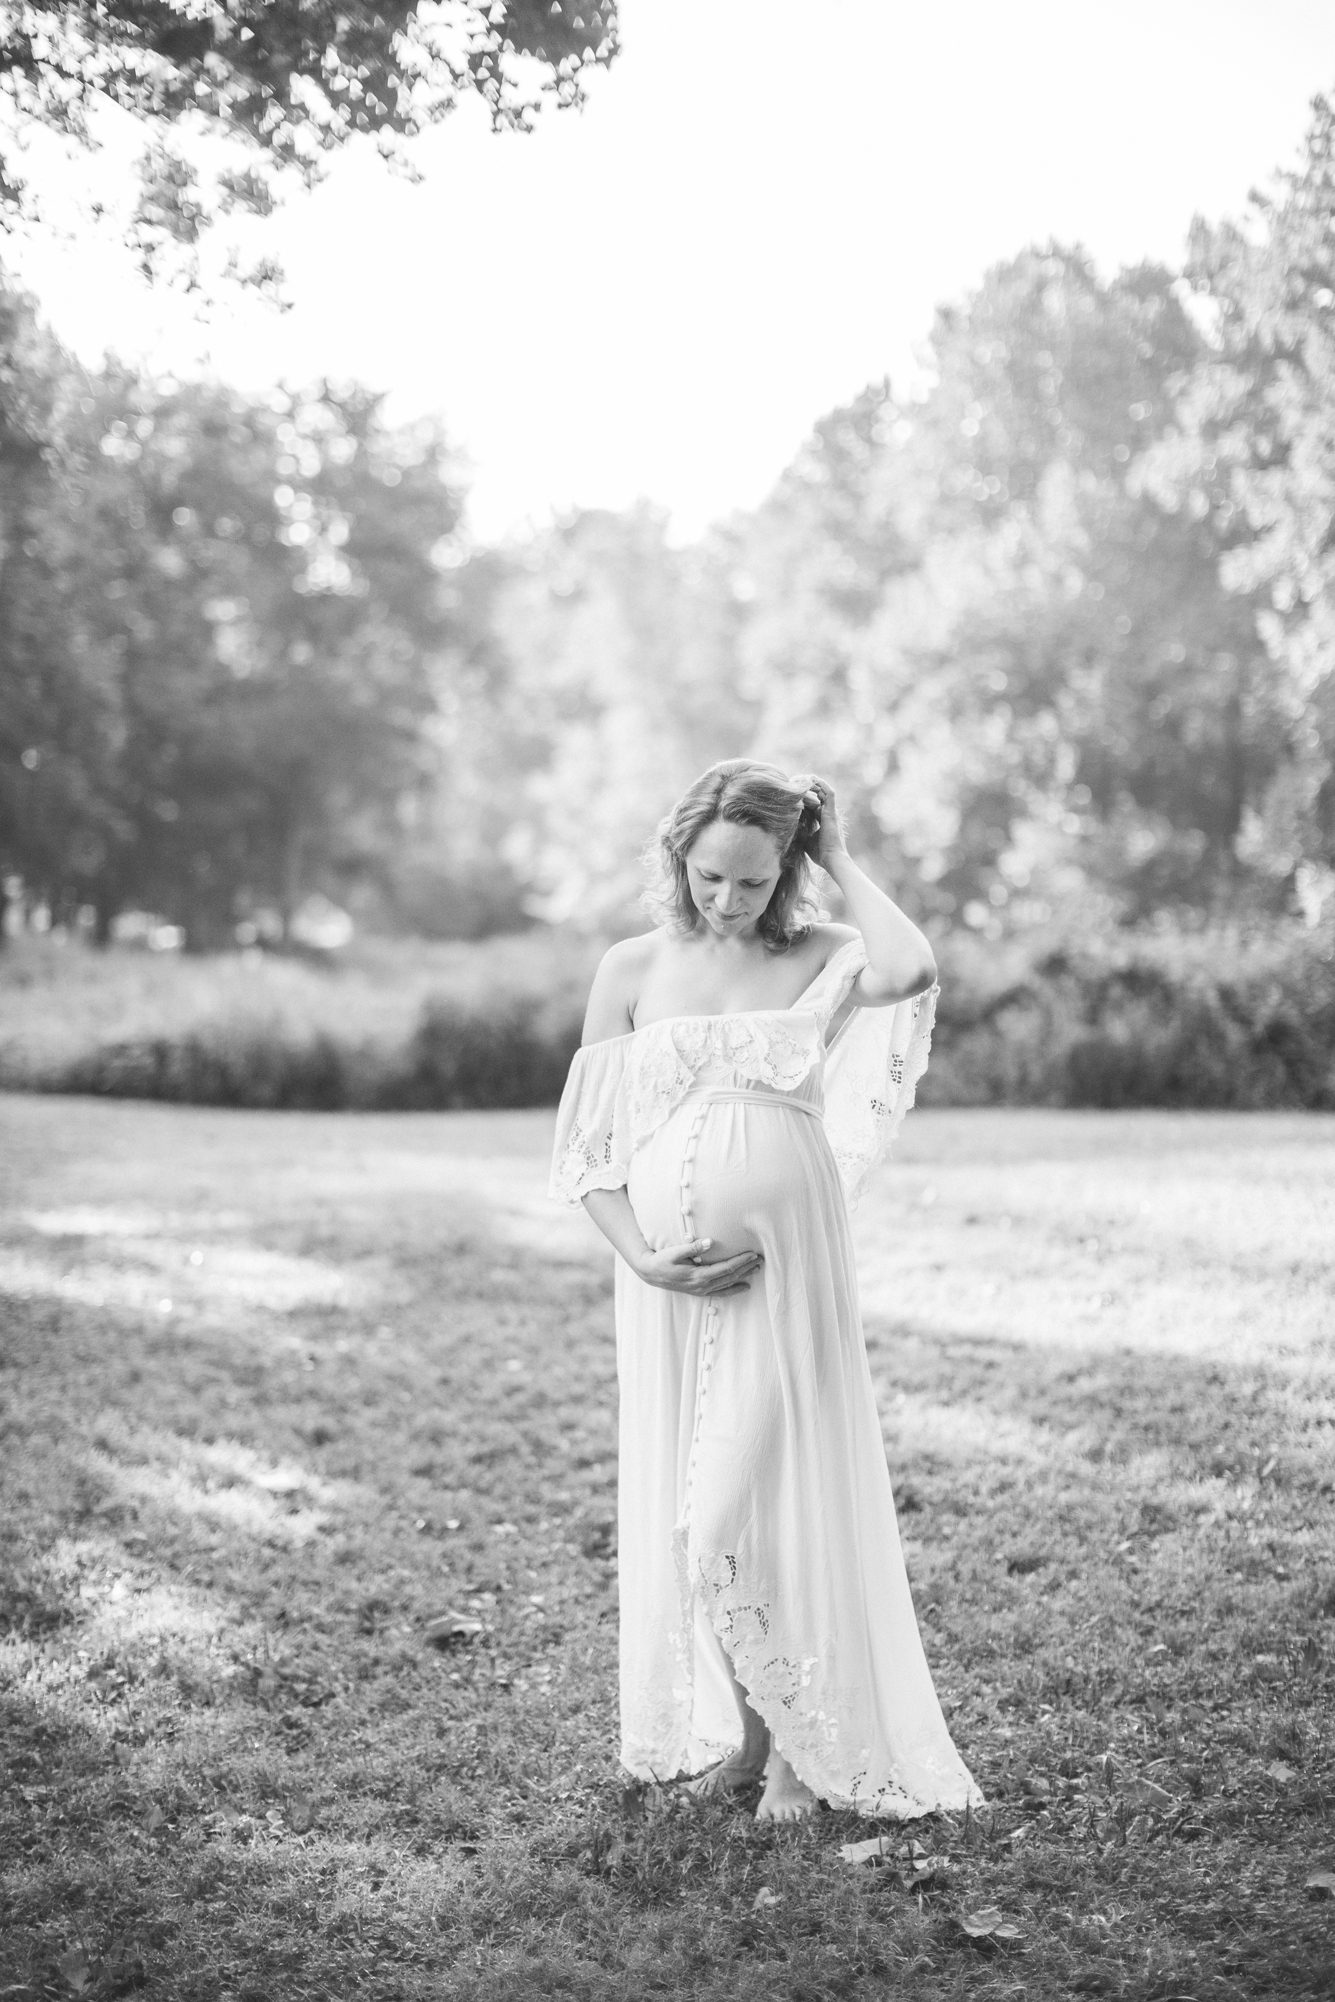 Stunning black and white portrait from maternity session of Mom looking at bump. Photo by LRG Portraits.